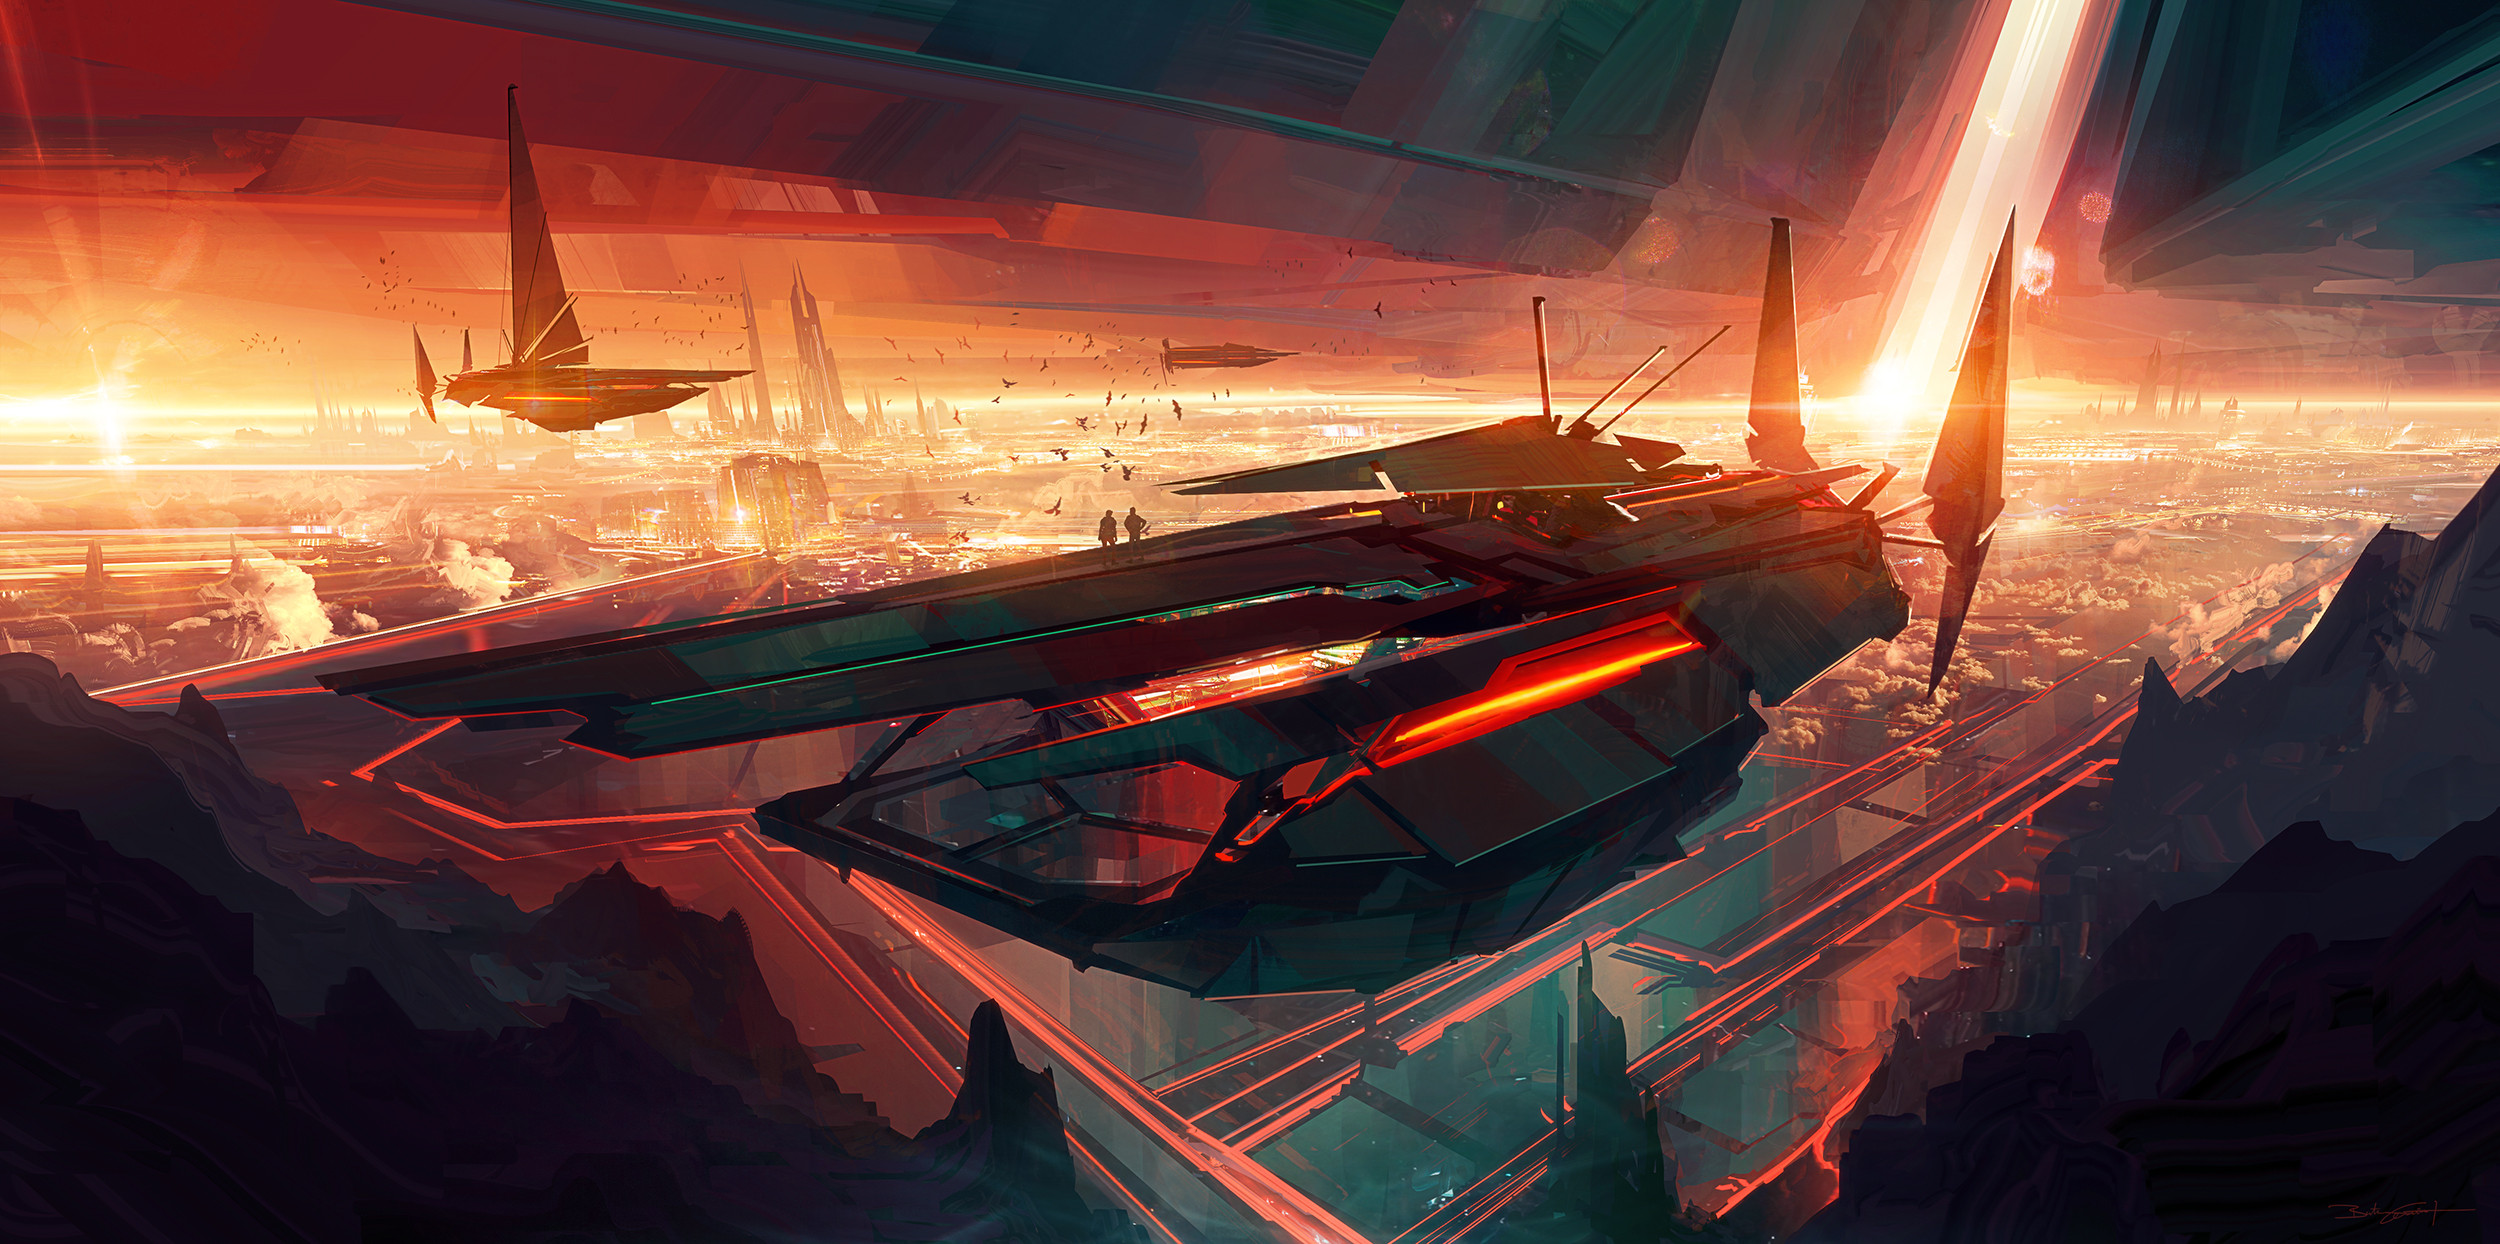 Sky is the limit by Bastien Grivet